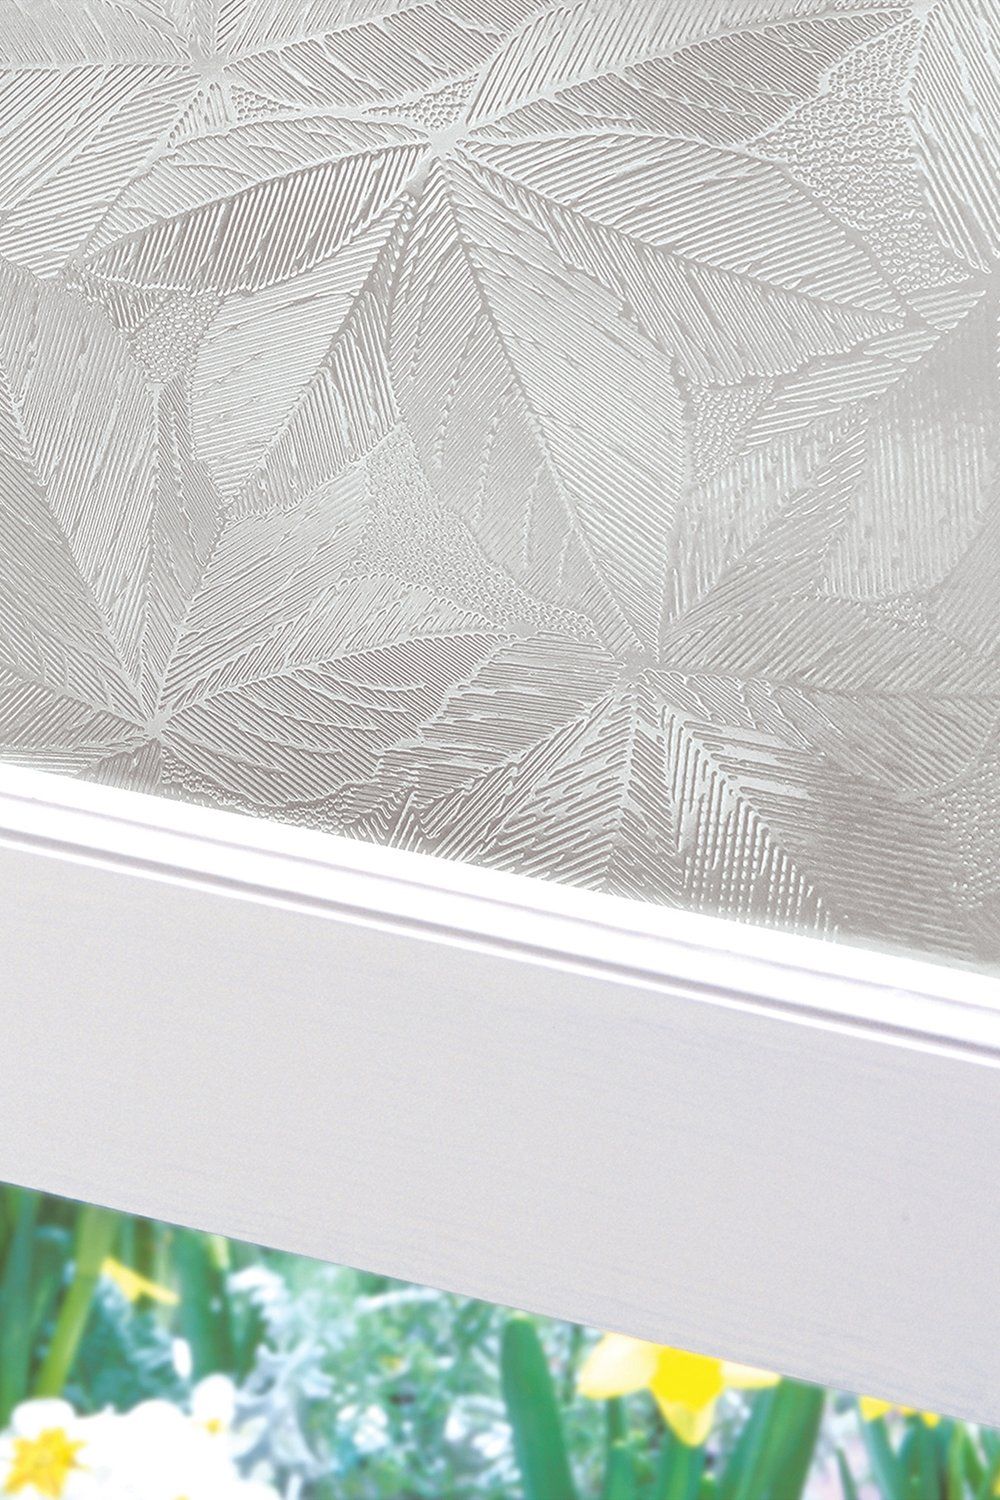 Elm Etched Glass Privacy Static Cling Window Film 24" x 36"